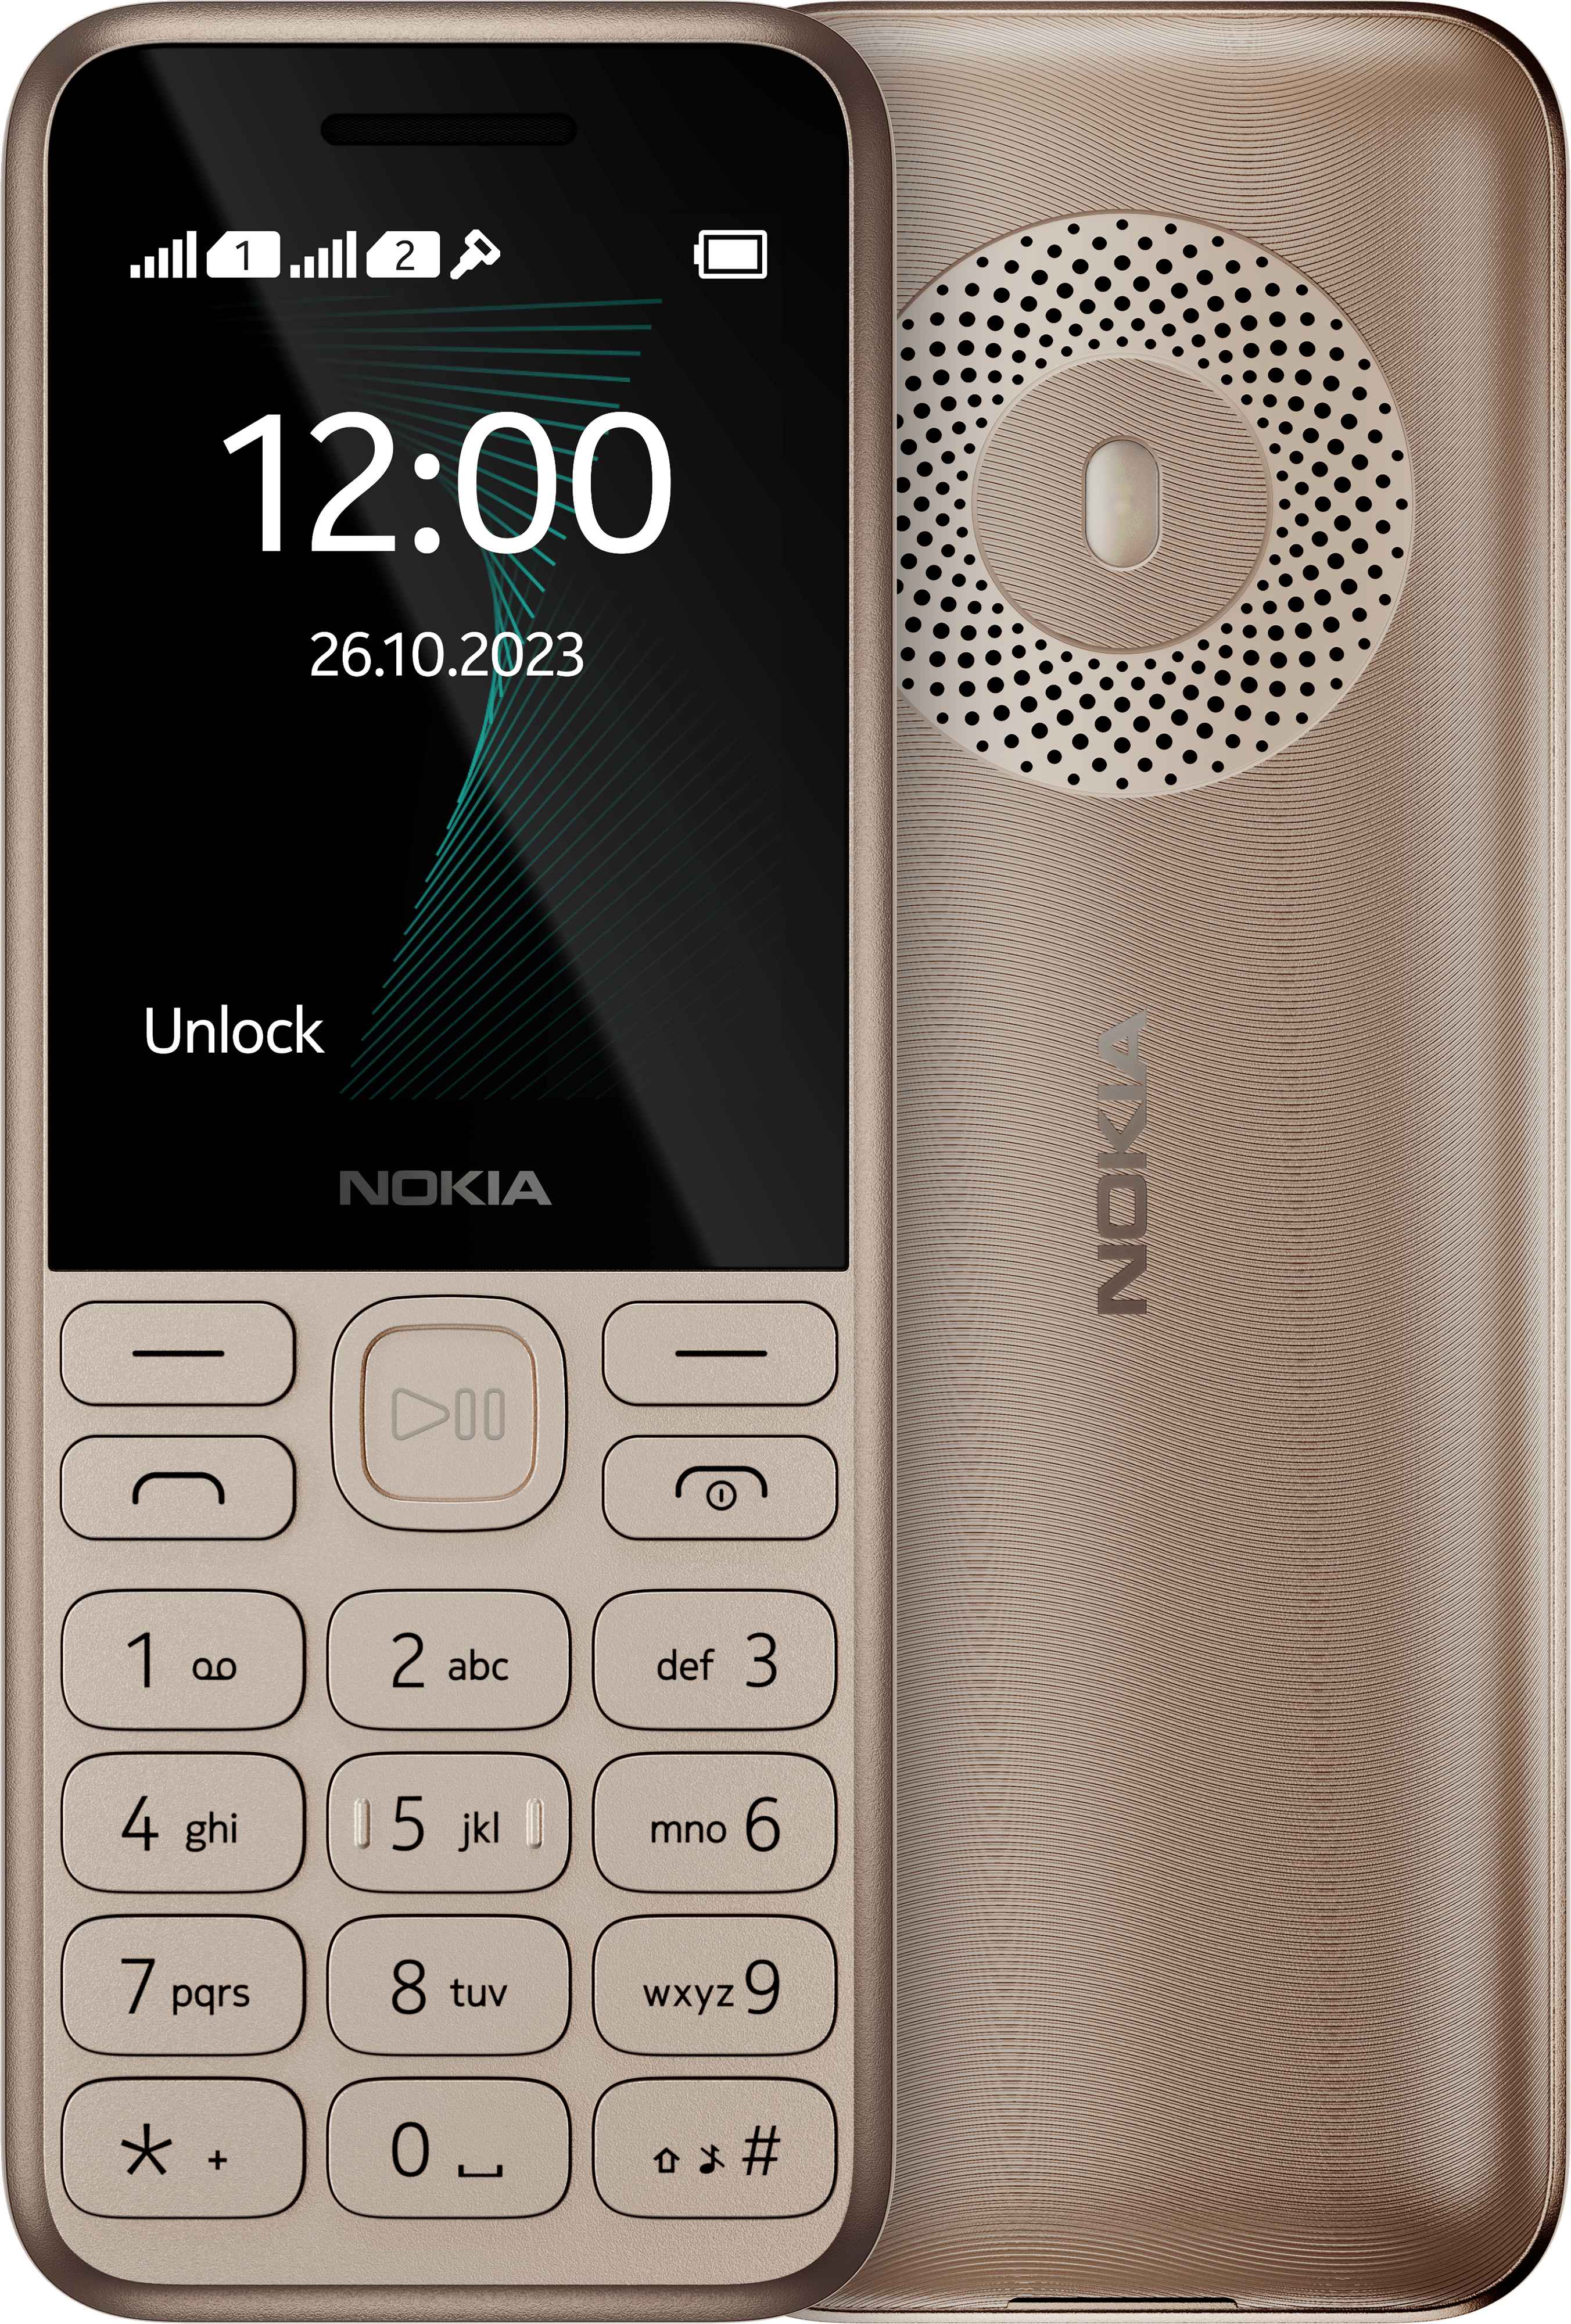 The new Nokia 130 feature phone